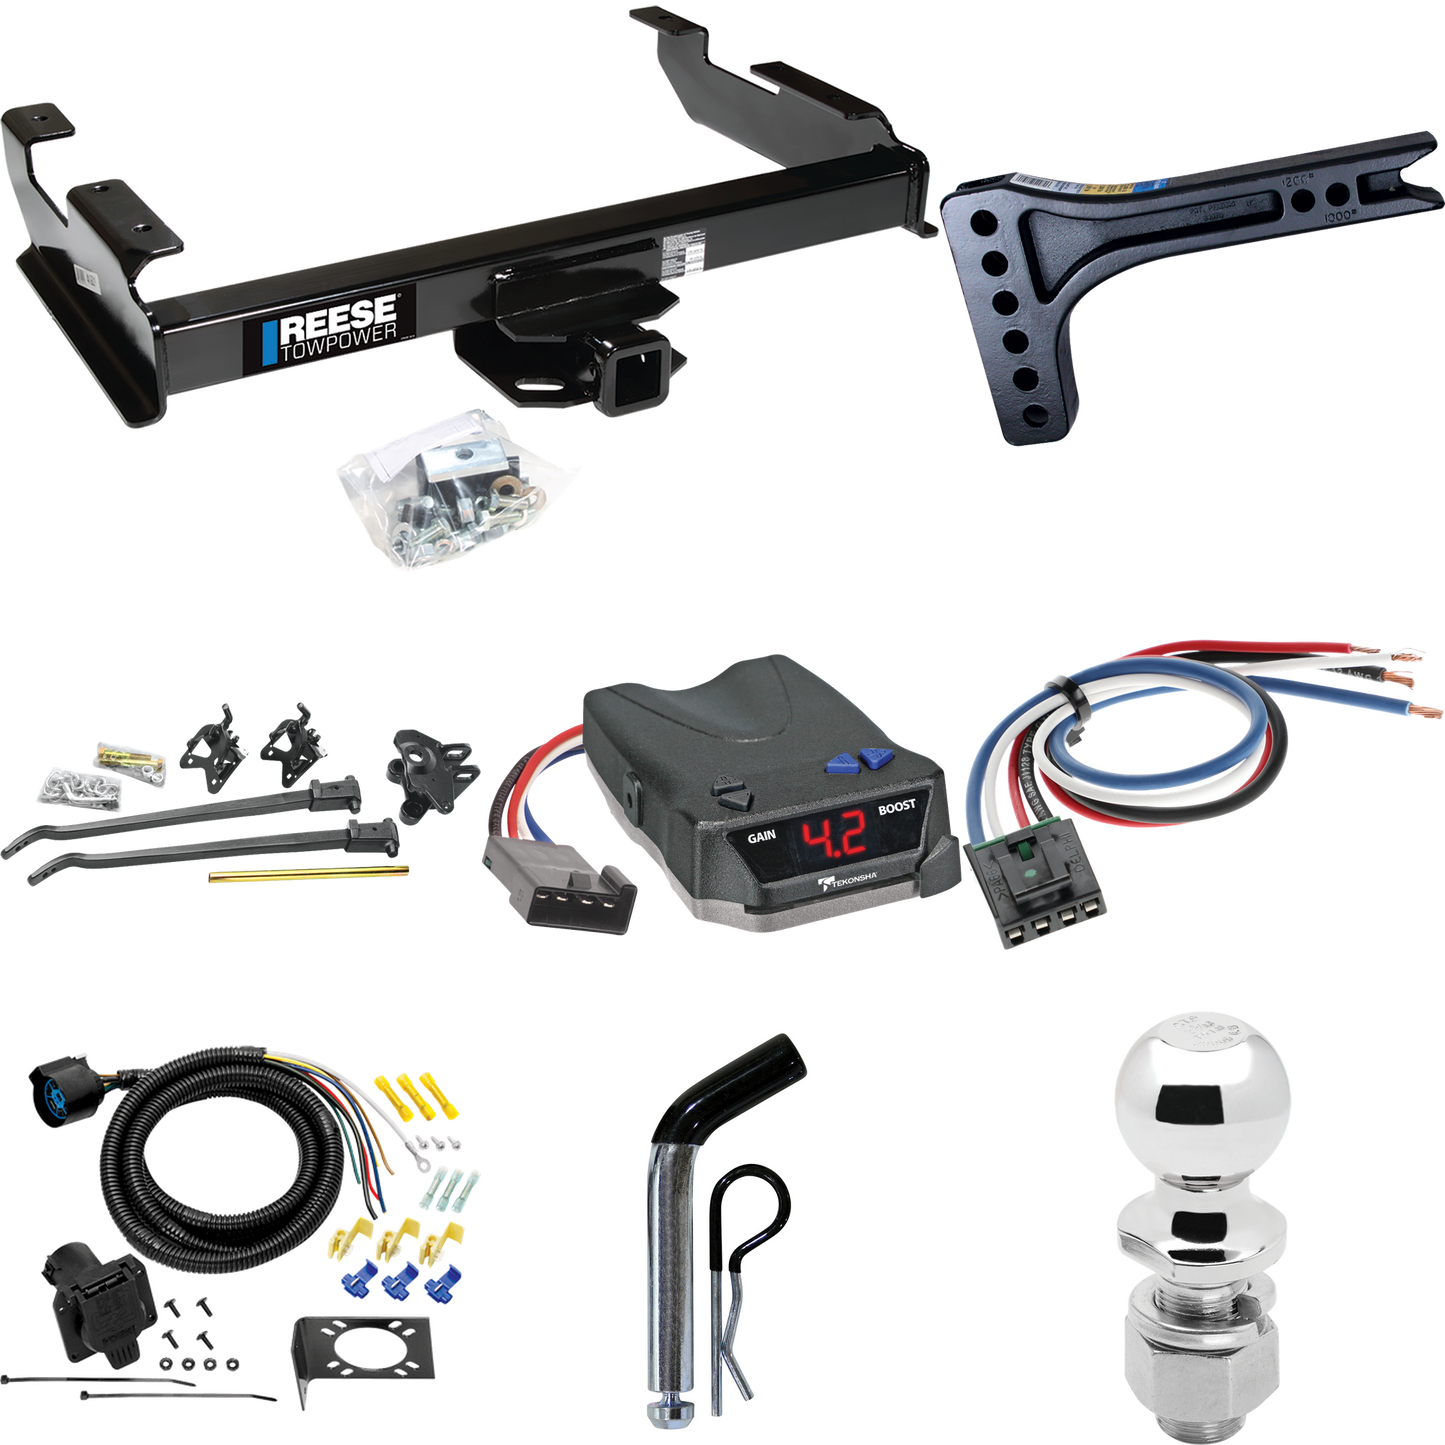 Fits 1988-1999 Chevrolet K1500 Trailer Hitch Tow PKG w/ 15K Trunnion Bar Weight Distribution Hitch + Pin/Clip + 2-5/16" Ball + Tekonsha BRAKE-EVN Brake Control + Generic BC Wiring Adapter + 7-Way RV Wiring By Reese Towpower